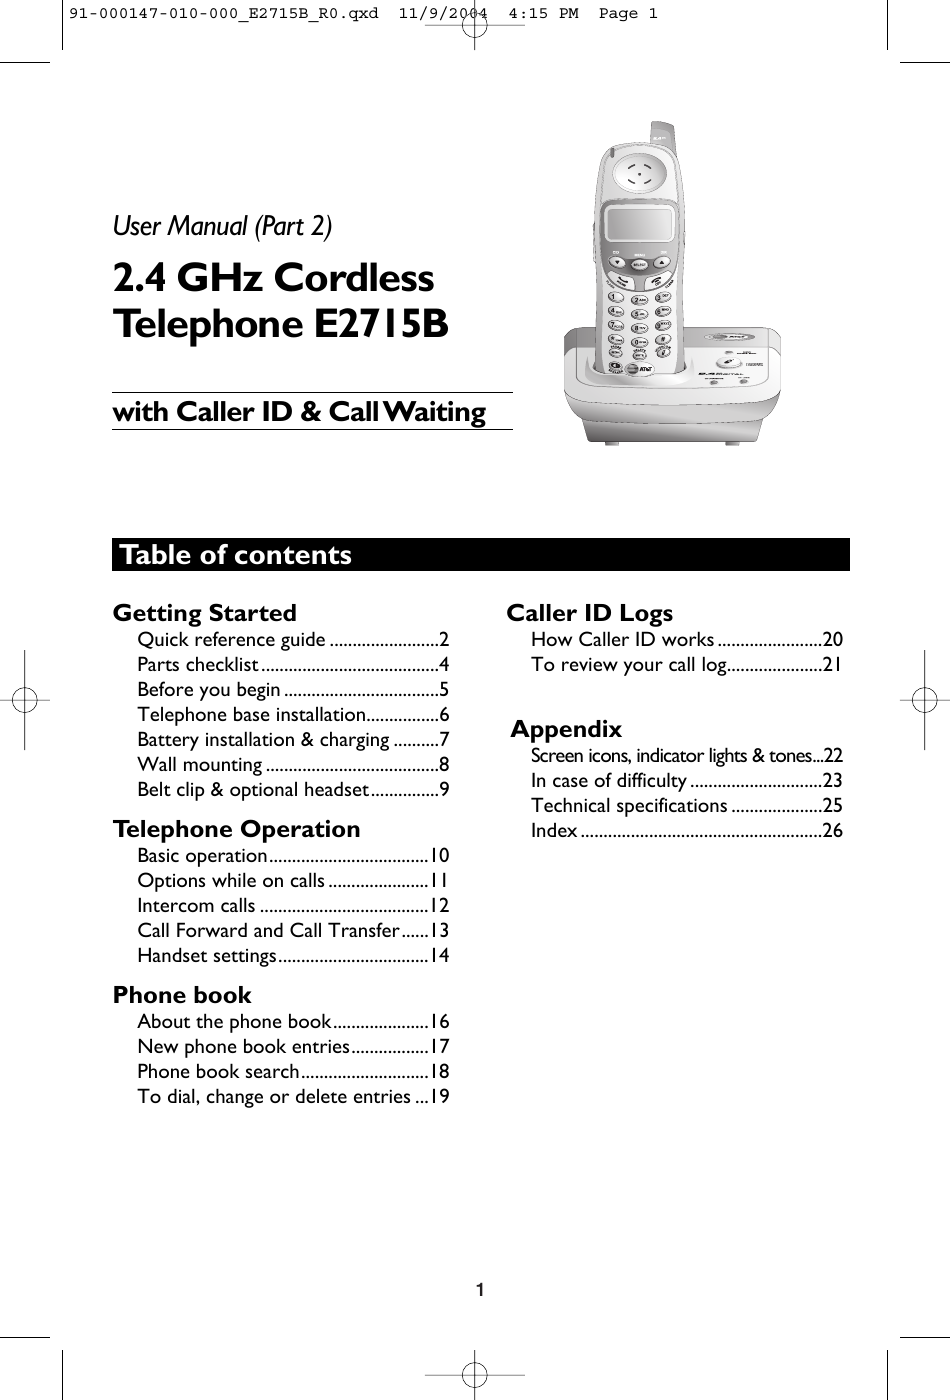 1Table of contentsGetting StartedQuick reference guide ........................2Parts checklist .......................................4Before you begin ..................................5Telephone base installation................6Battery installation &amp; charging ..........7Wall mounting ......................................8Belt clip &amp; optional headset...............9Telephone OperationBasic operation...................................10Options while on calls ......................11Intercom calls .....................................12Call Forward and Call Transfer......13Handset settings.................................14Phone bookAbout the phone book.....................16New phone book entries.................17Phone book search............................18To dial, change or delete entries ...19Caller ID LogsHow Caller ID works .......................20To review your call log.....................21AppendixScreen icons, indicator lights &amp; tones...22In case of difficulty .............................23Technical specifications ....................25Index .....................................................26User Manual (Part 2)2.4 GHz CordlessTelephone E2715Bwith Caller ID &amp; Call Waiting91-000147-010-000_E2715B_R0.qxd  11/9/2004  4:15 PM  Page 1